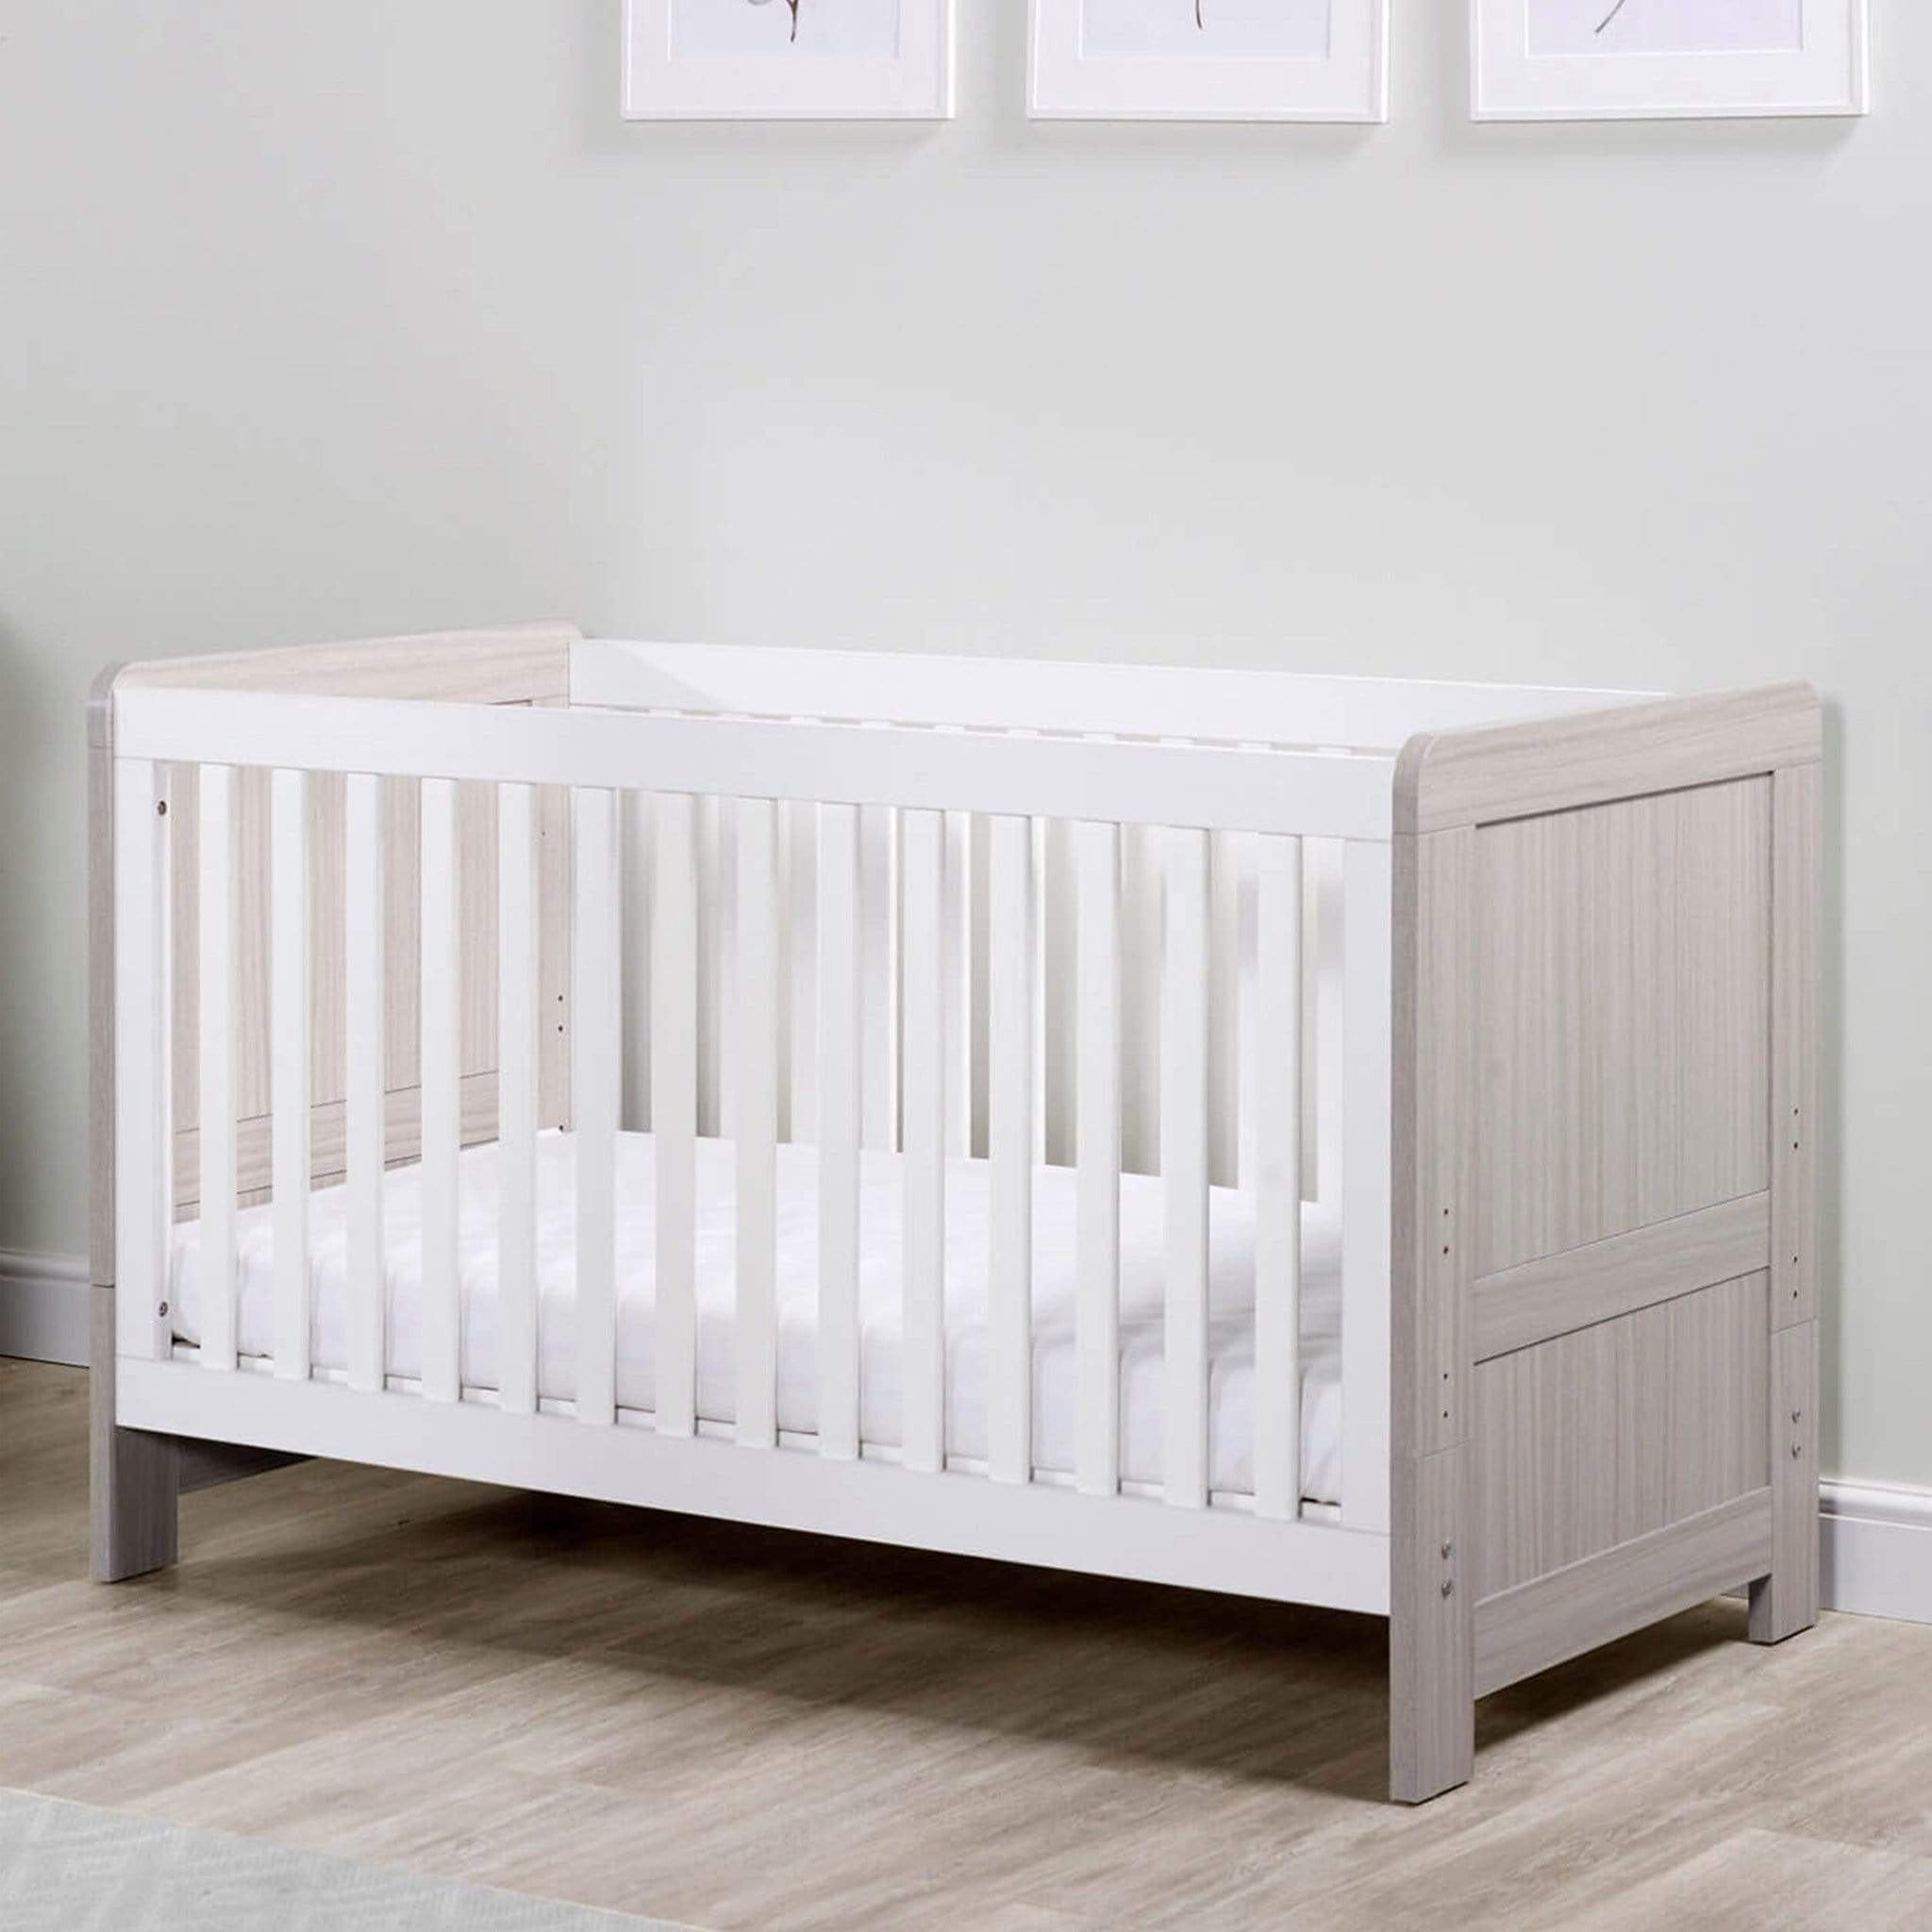 Ickle Bubba Cot Beds Ickle Bubba Pembrey Cotbed Ash Grey & White